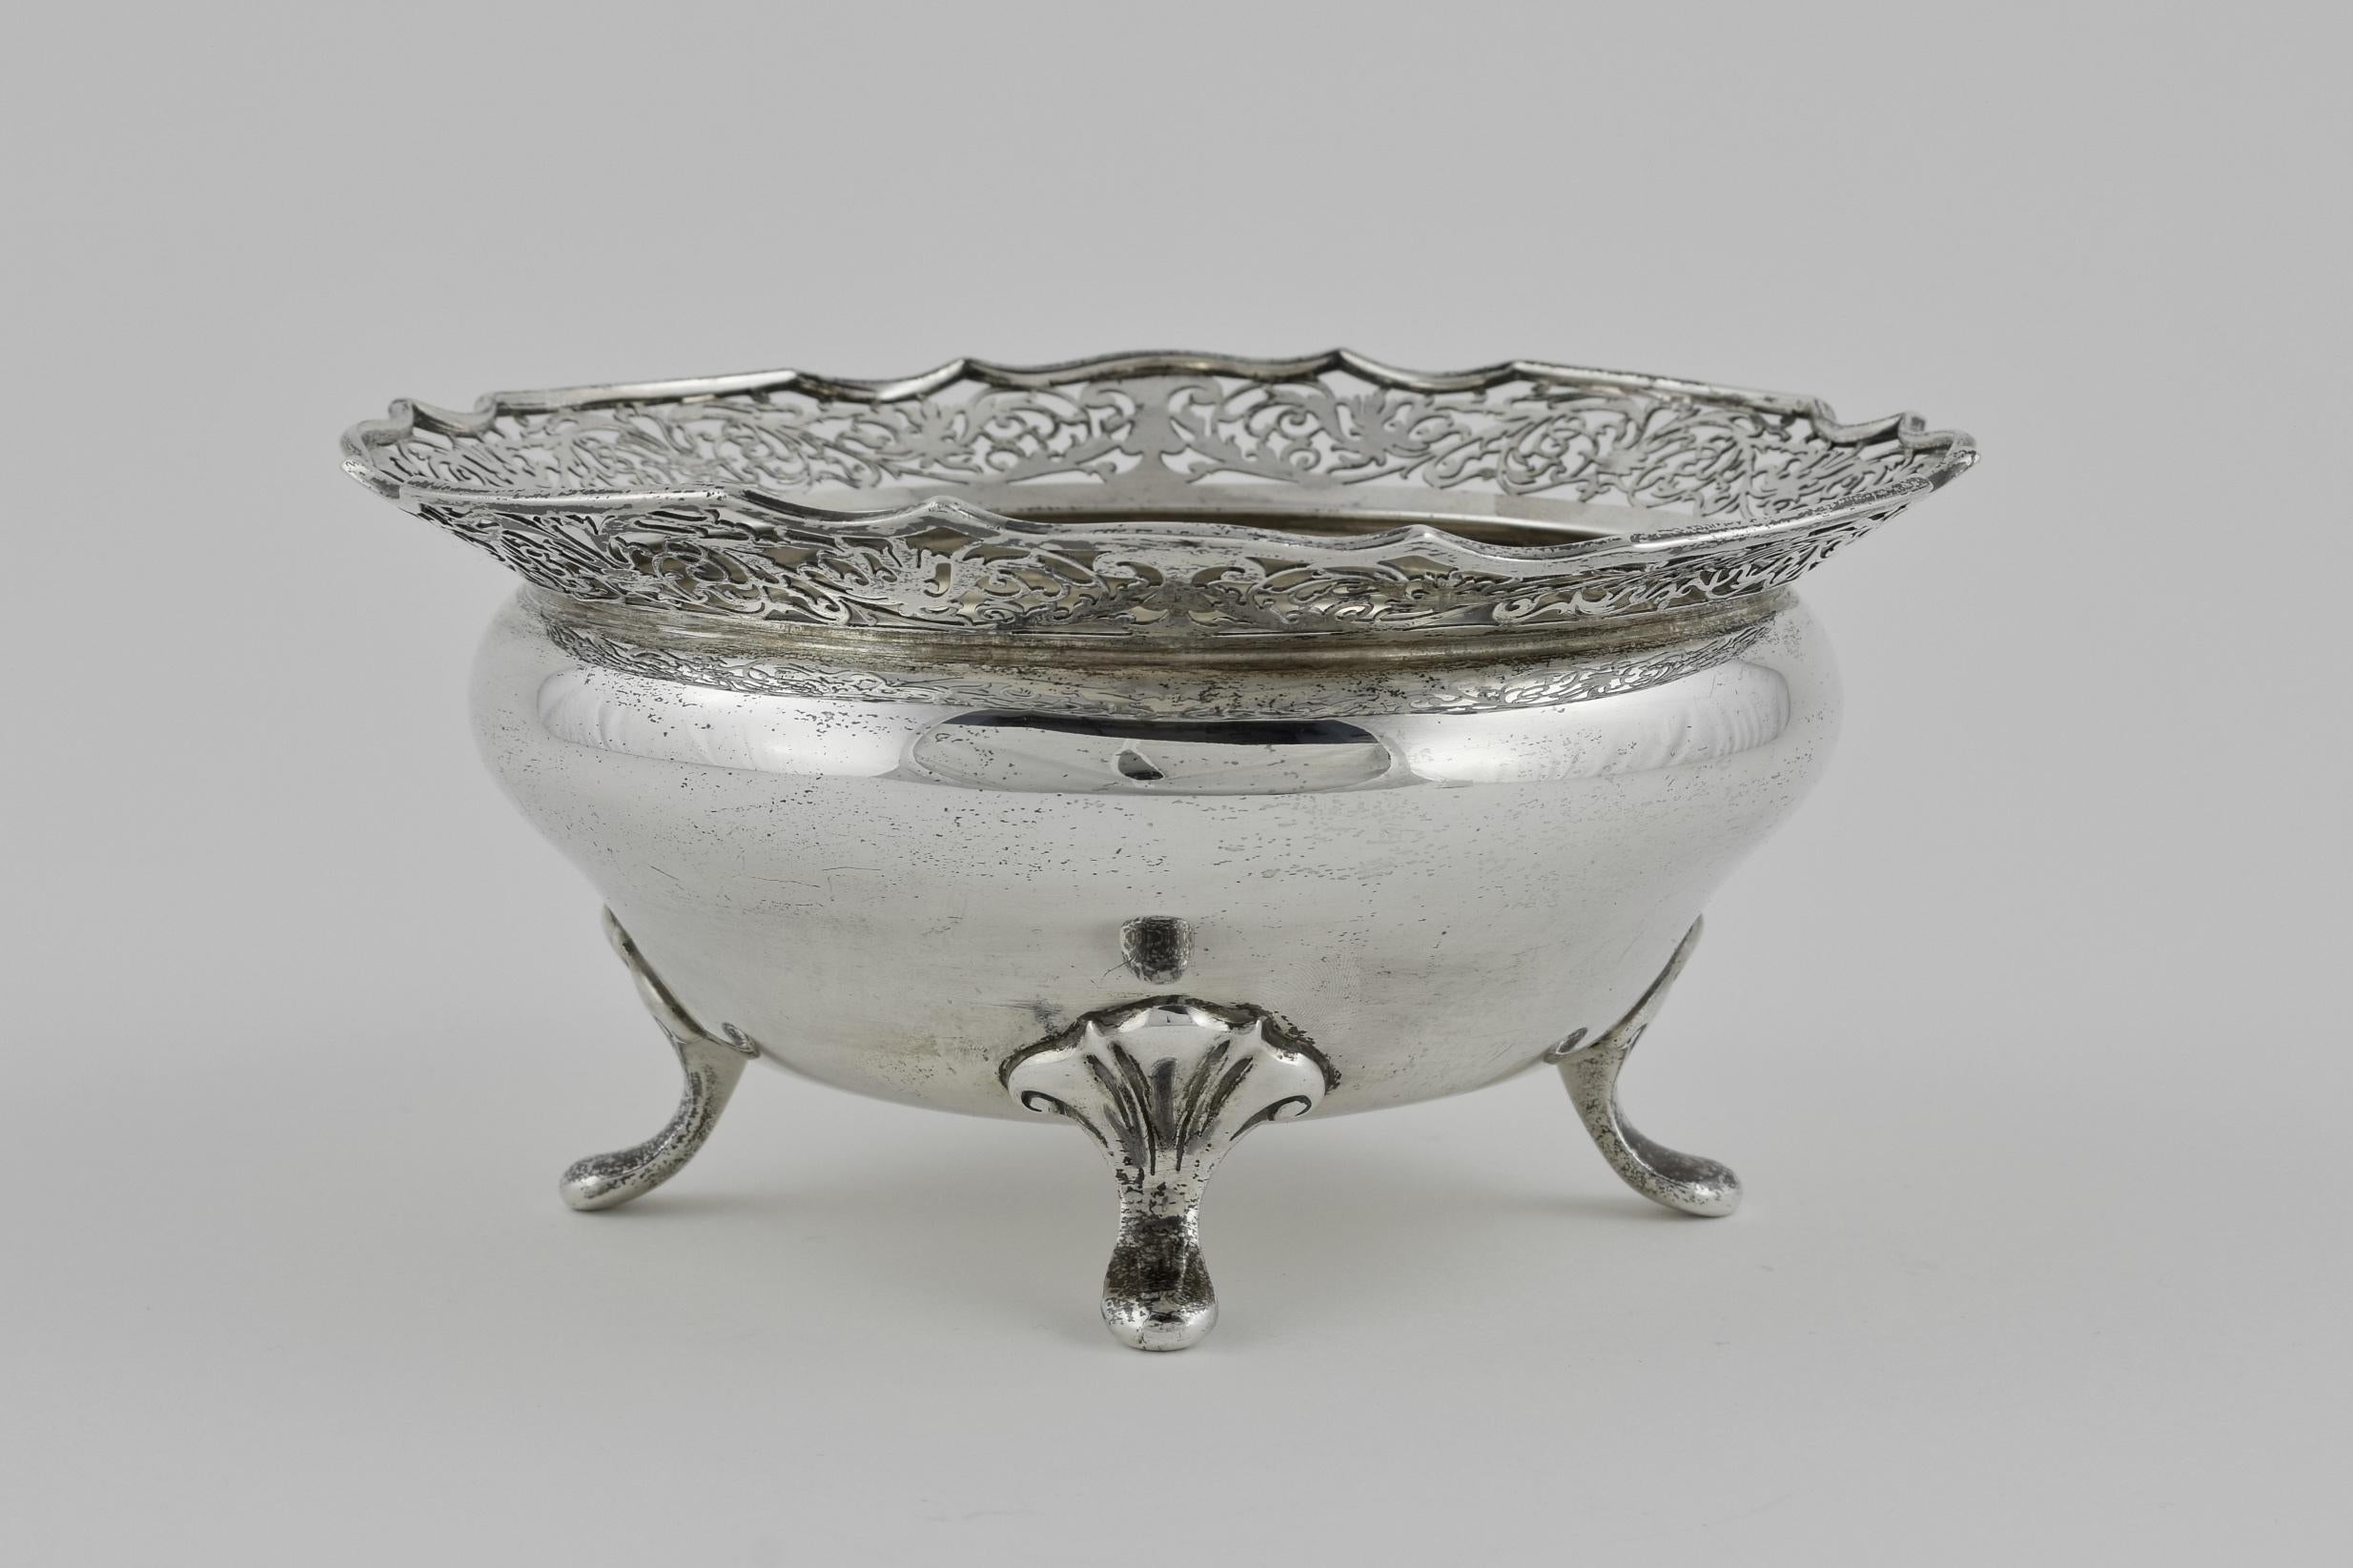 Fully hallmarked in Sheffield 1920 by John and William Deakin. Placed on four feet, this rose bowl has a plain body, yet is  embellished with a charming pierced edge boarder.

Weight: 17.36 oz 